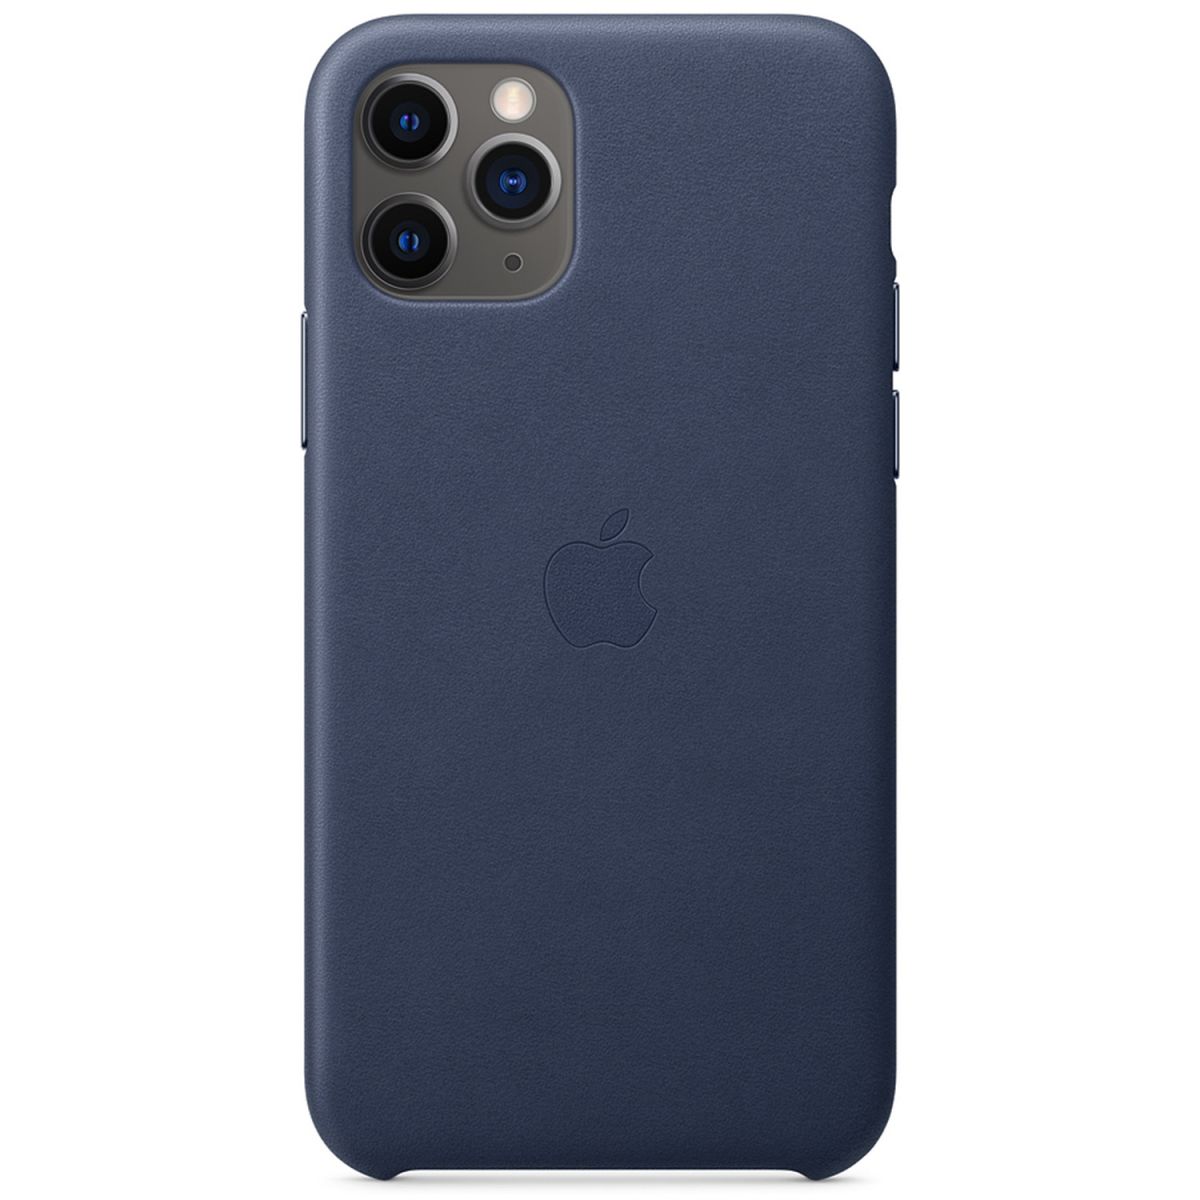 Apple Leather Backcover for iPhone 11 Pro - Midnight Blue